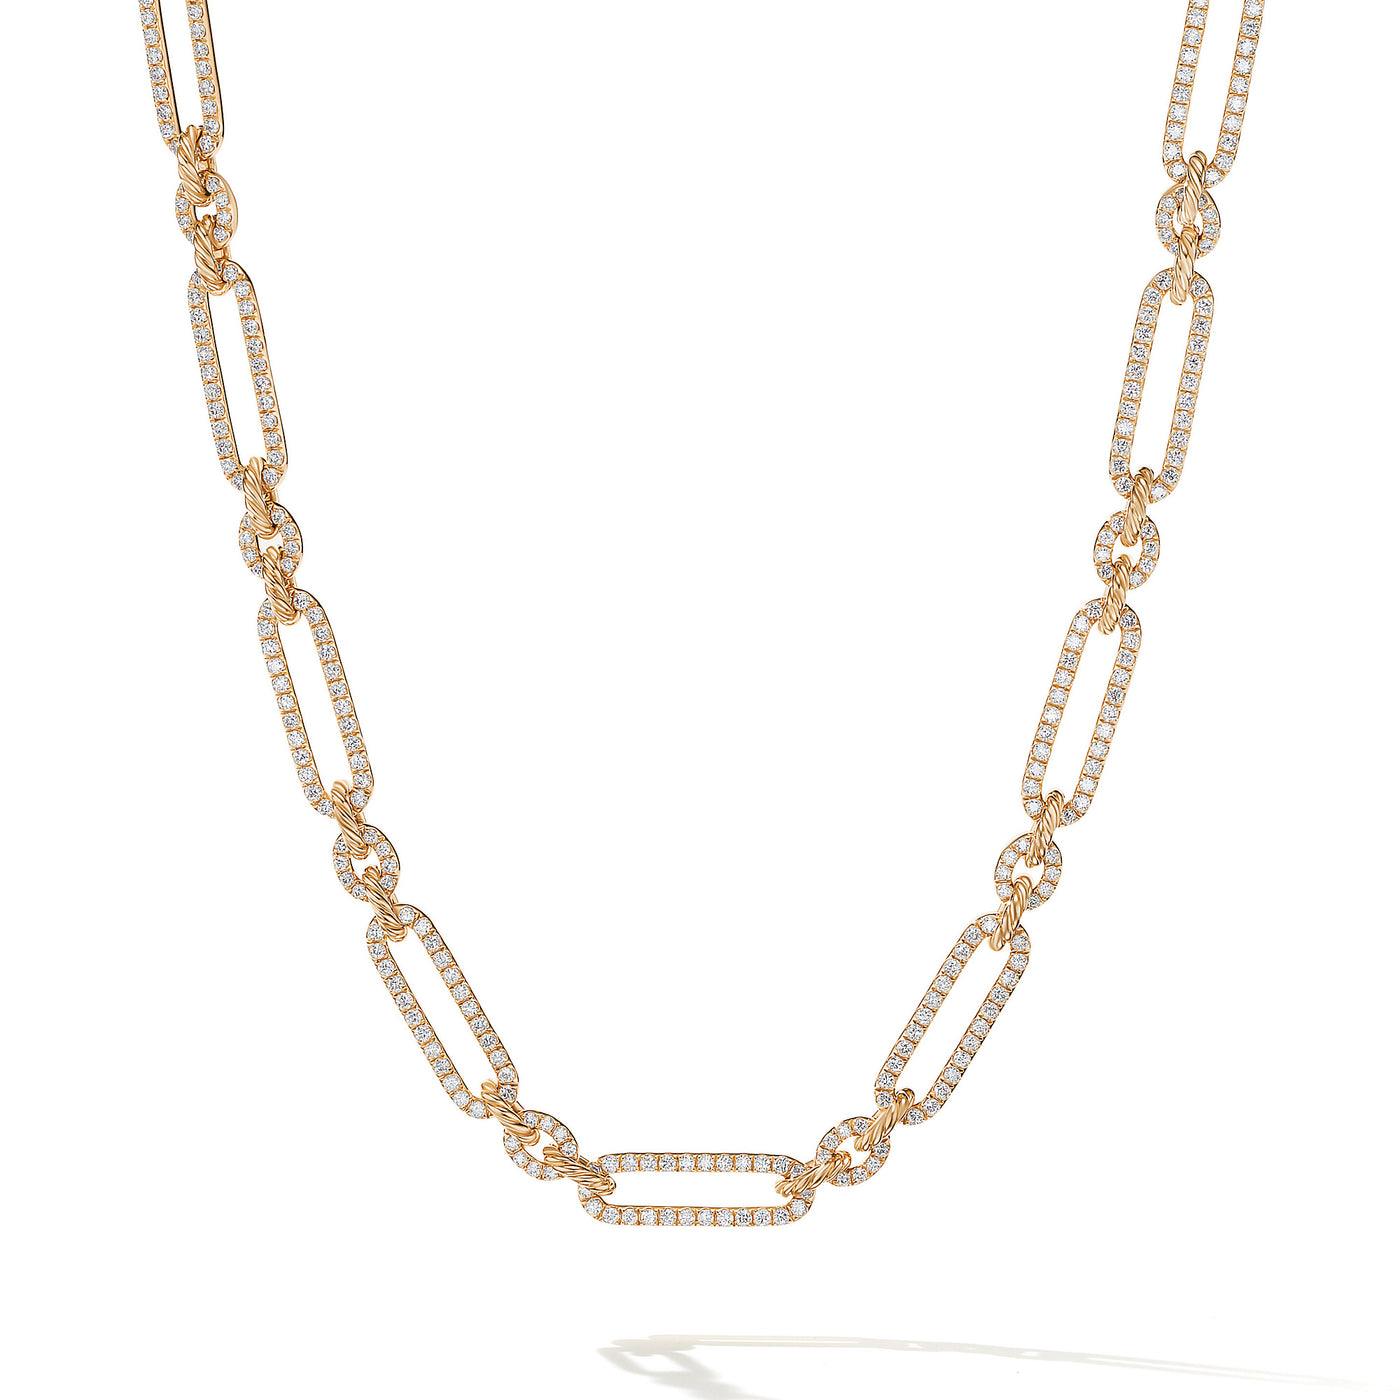 Lexington Chain Necklace in 18K Yellow Gold with Diamonds, 6.5mm